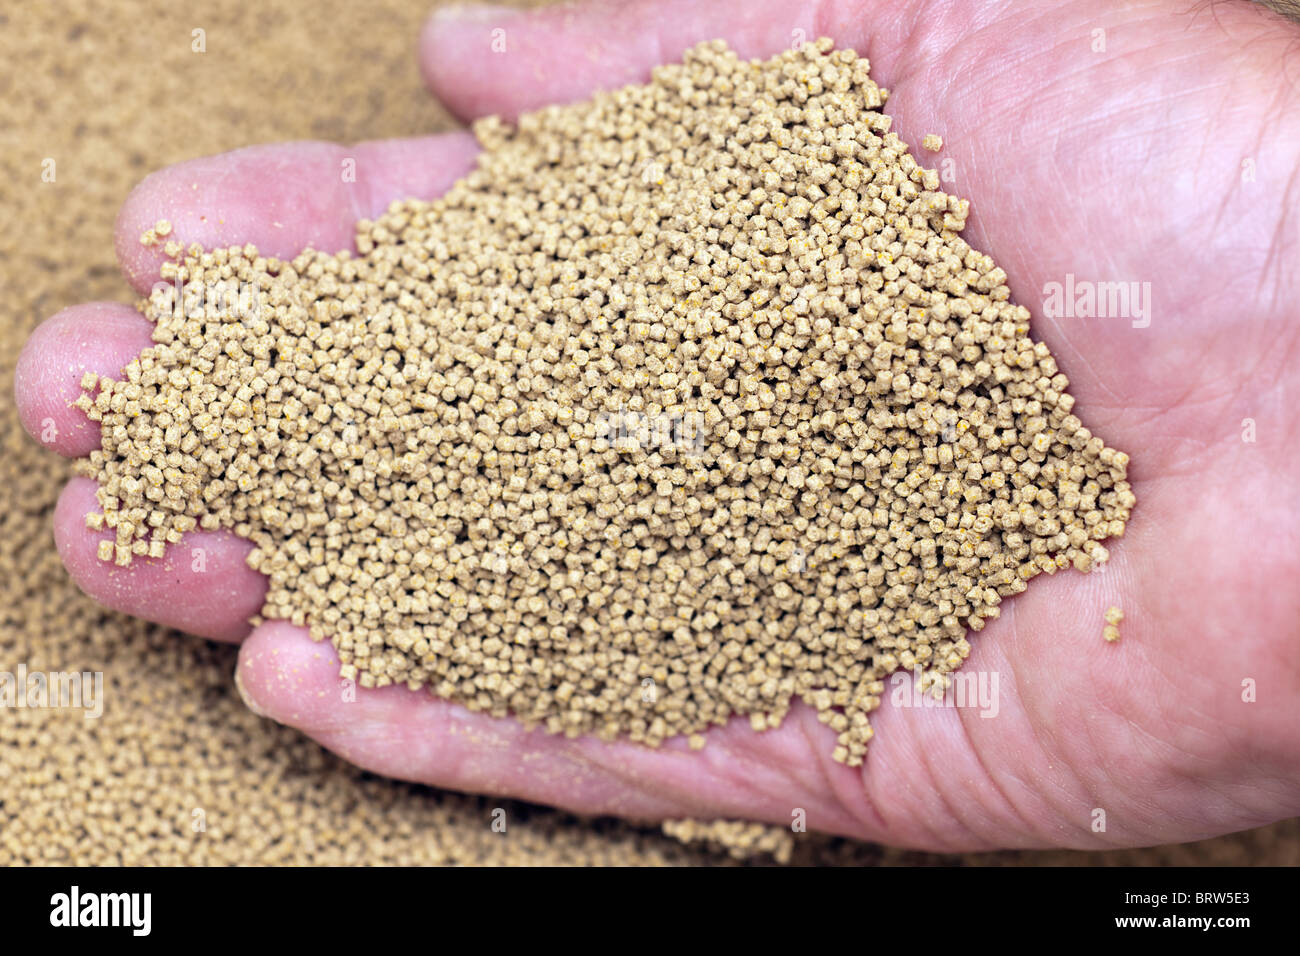 Handfull of 1mm fishmeal trout pellets Stock Photo - Alamy